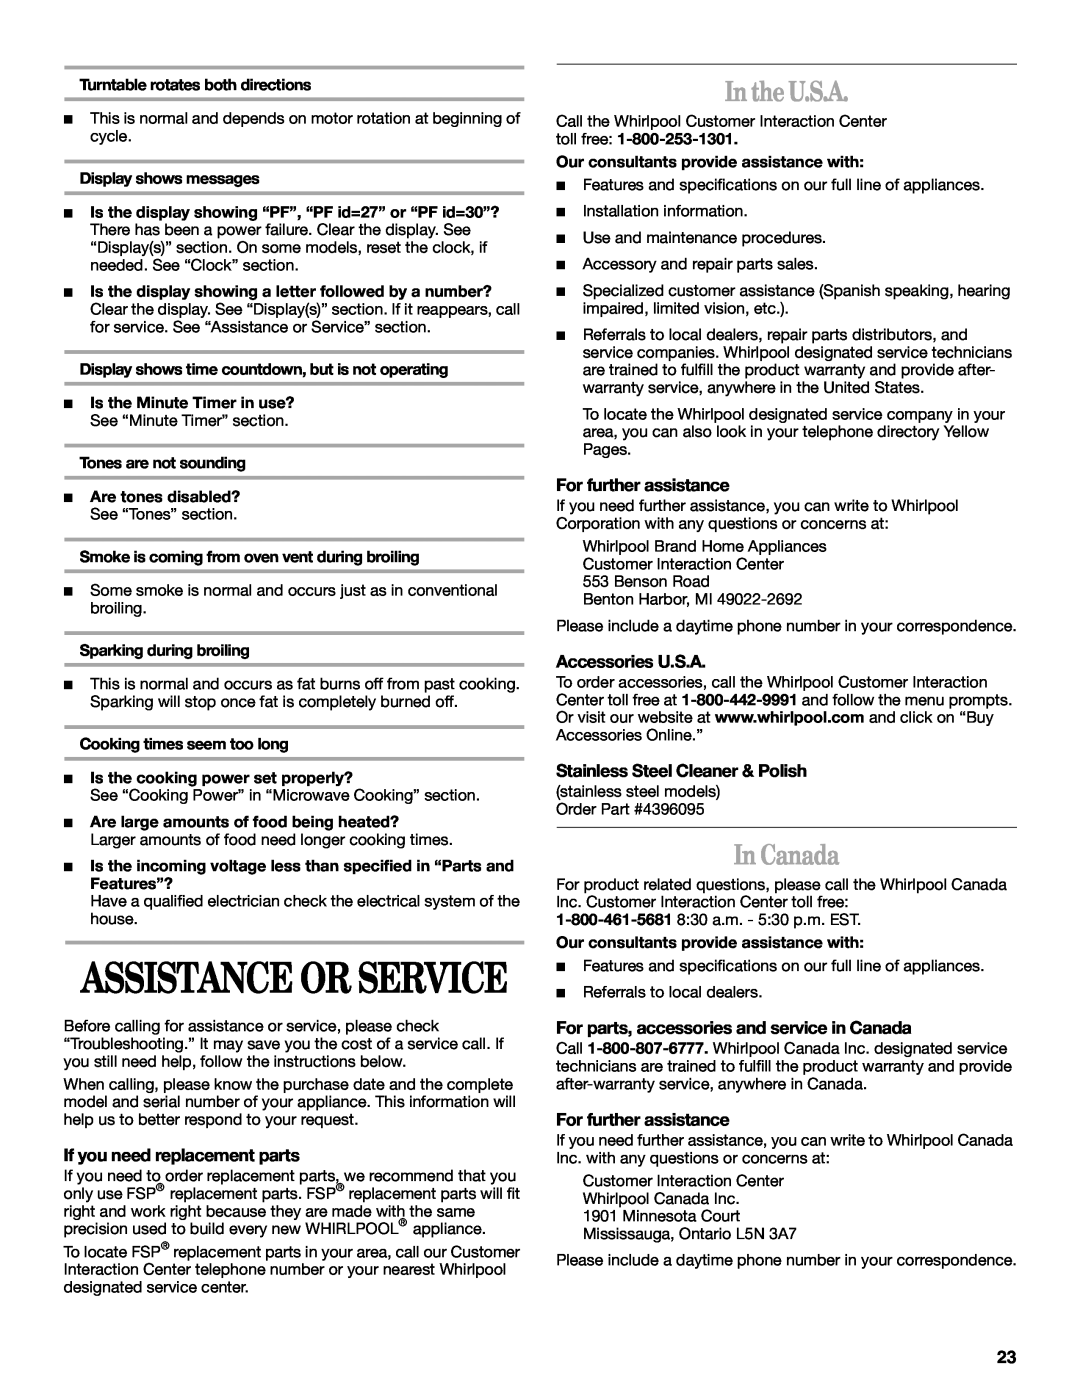 Whirlpool YGSC278, YGSC308 manual Inthe U.S.A, In Canada, Assistance Or Service 